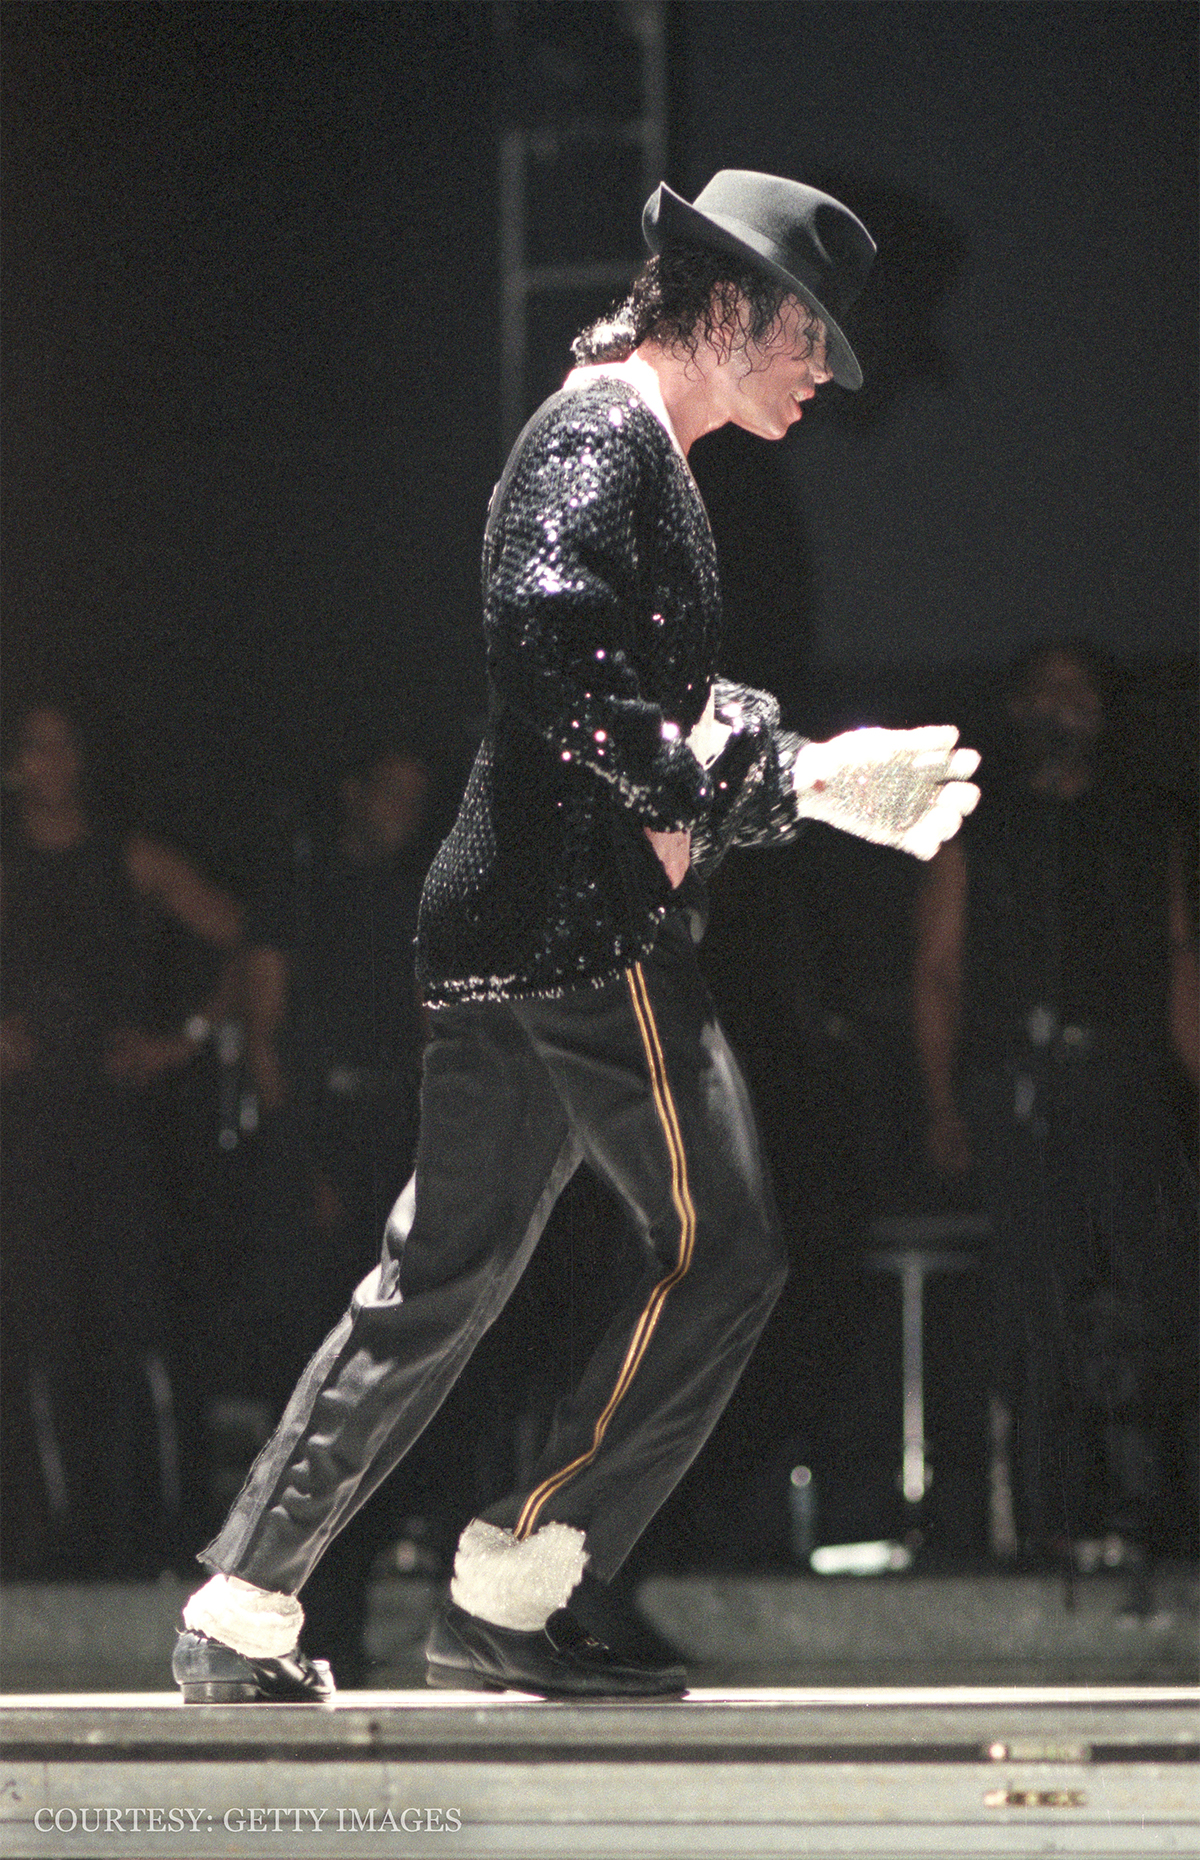 Michael Jackson moonwalks on stage during a concert tour.